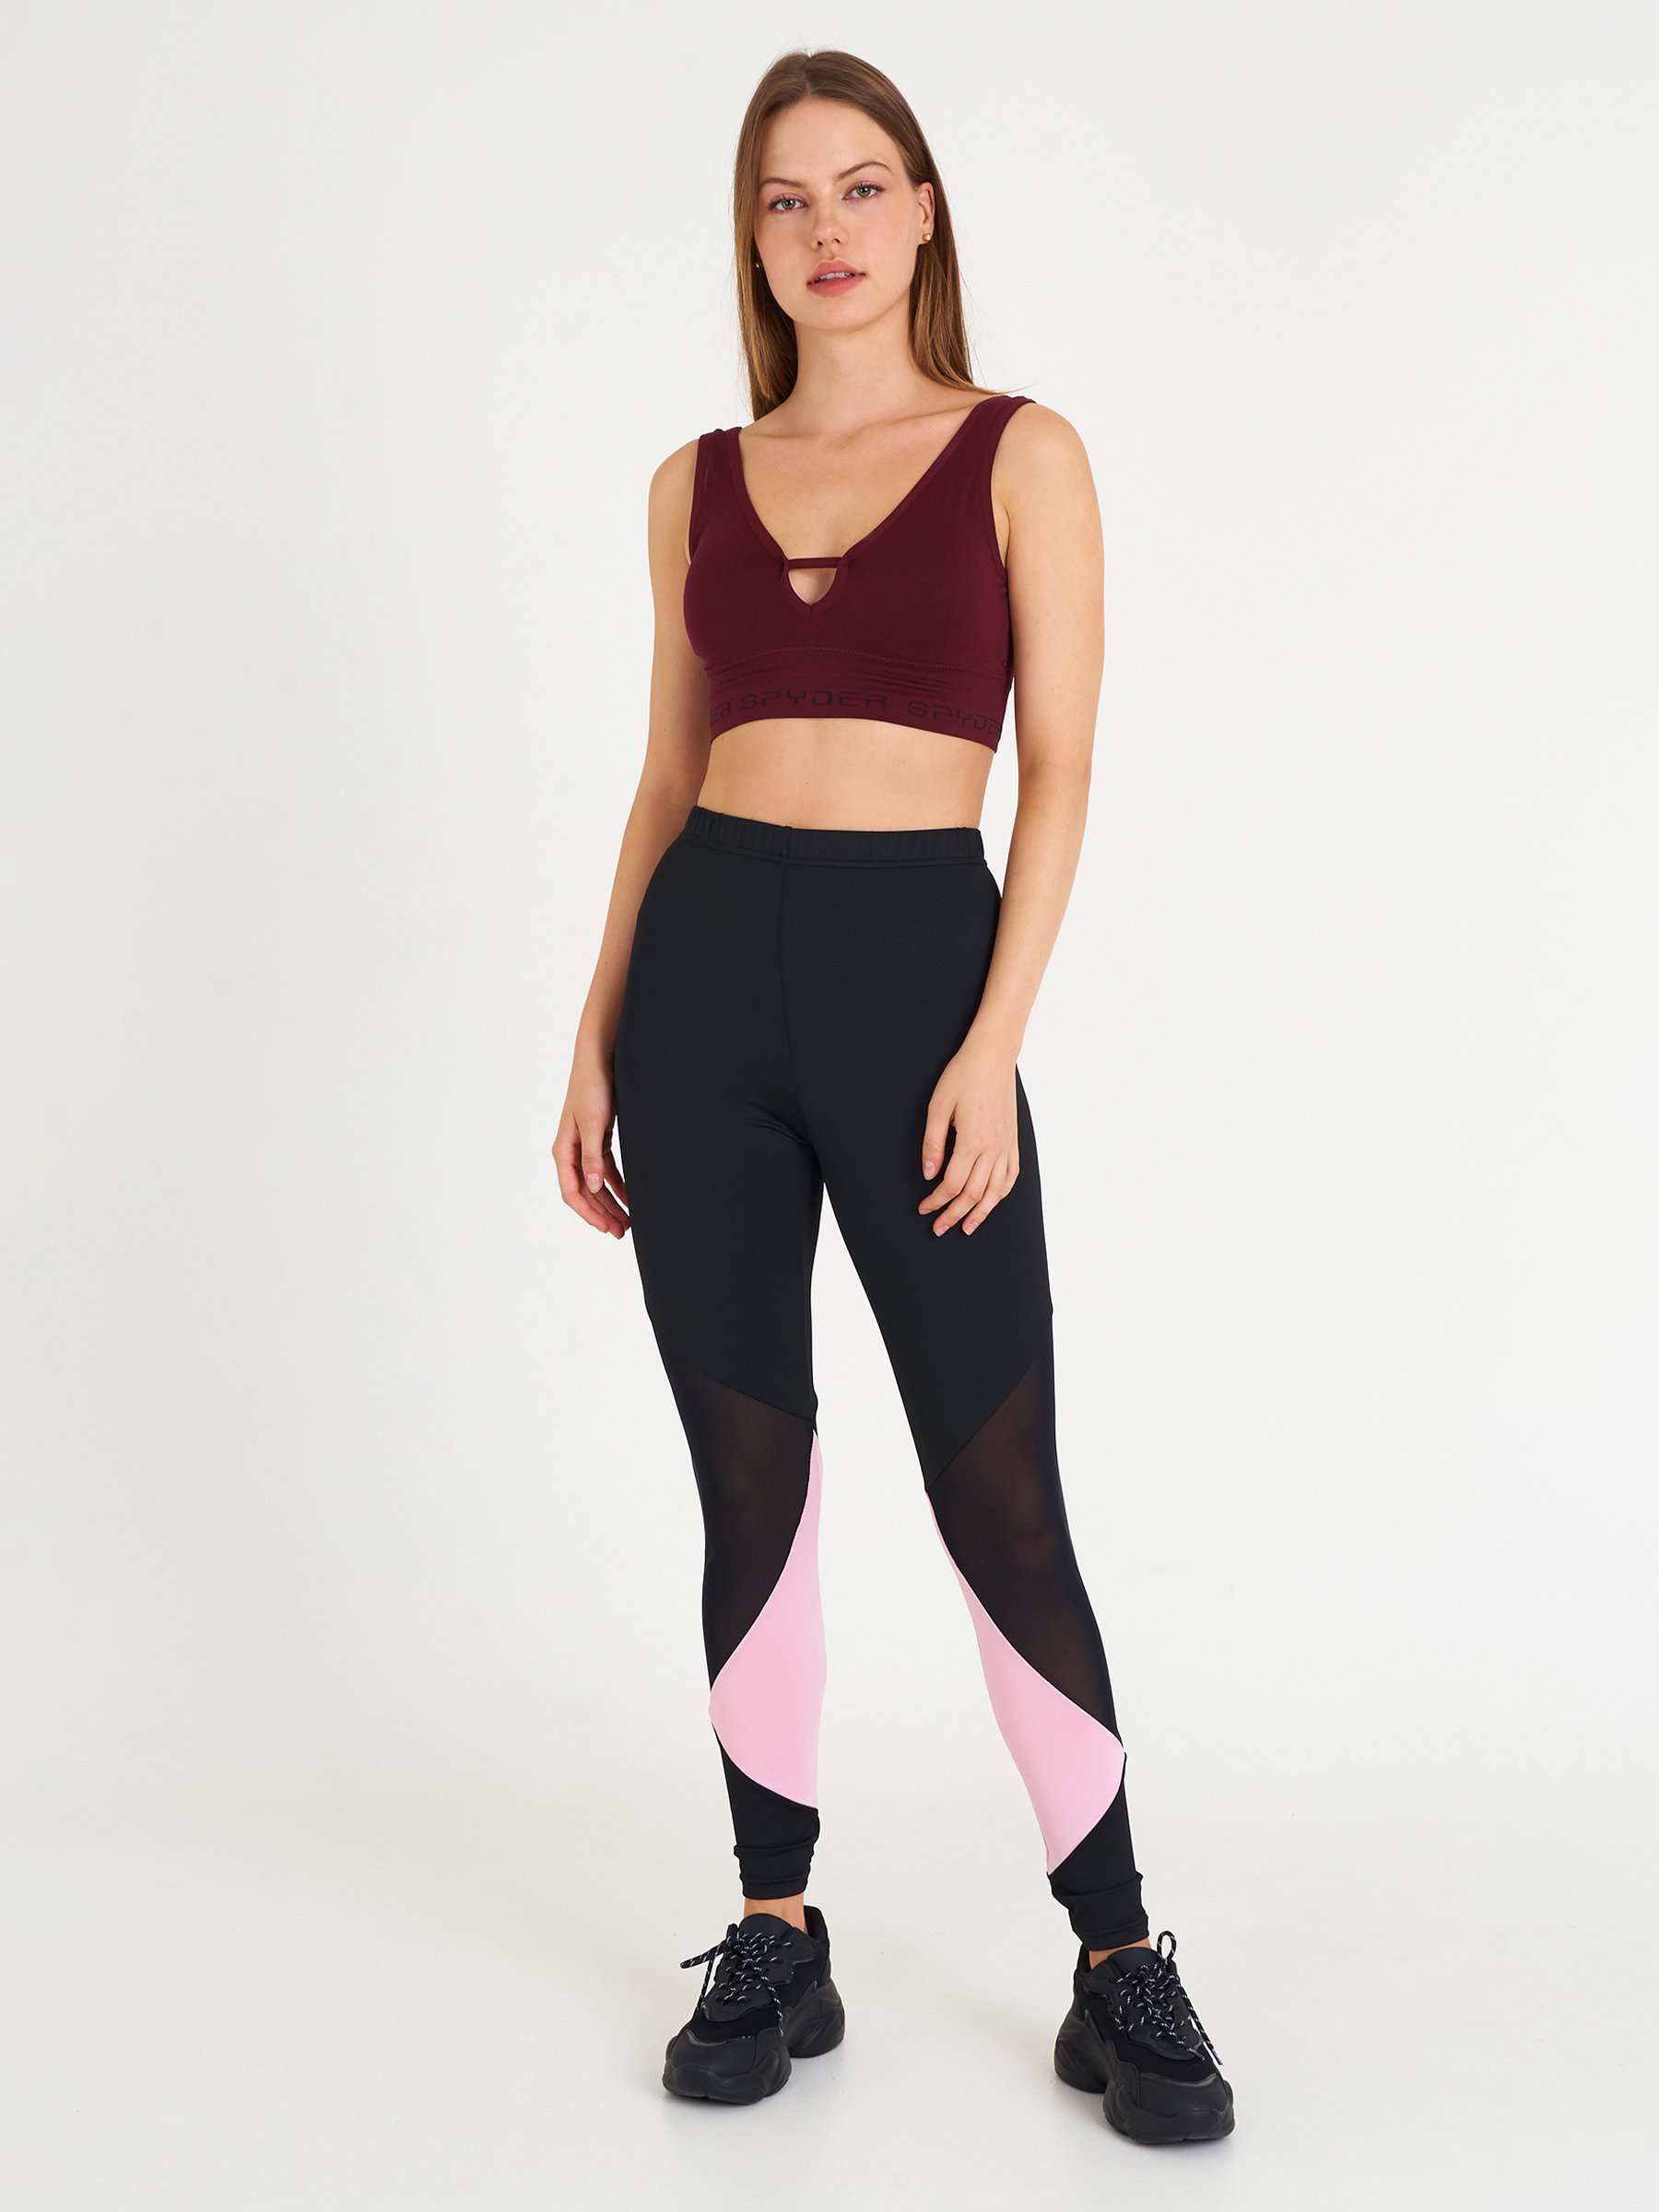 Athletic Leggings By Spyder Size: M